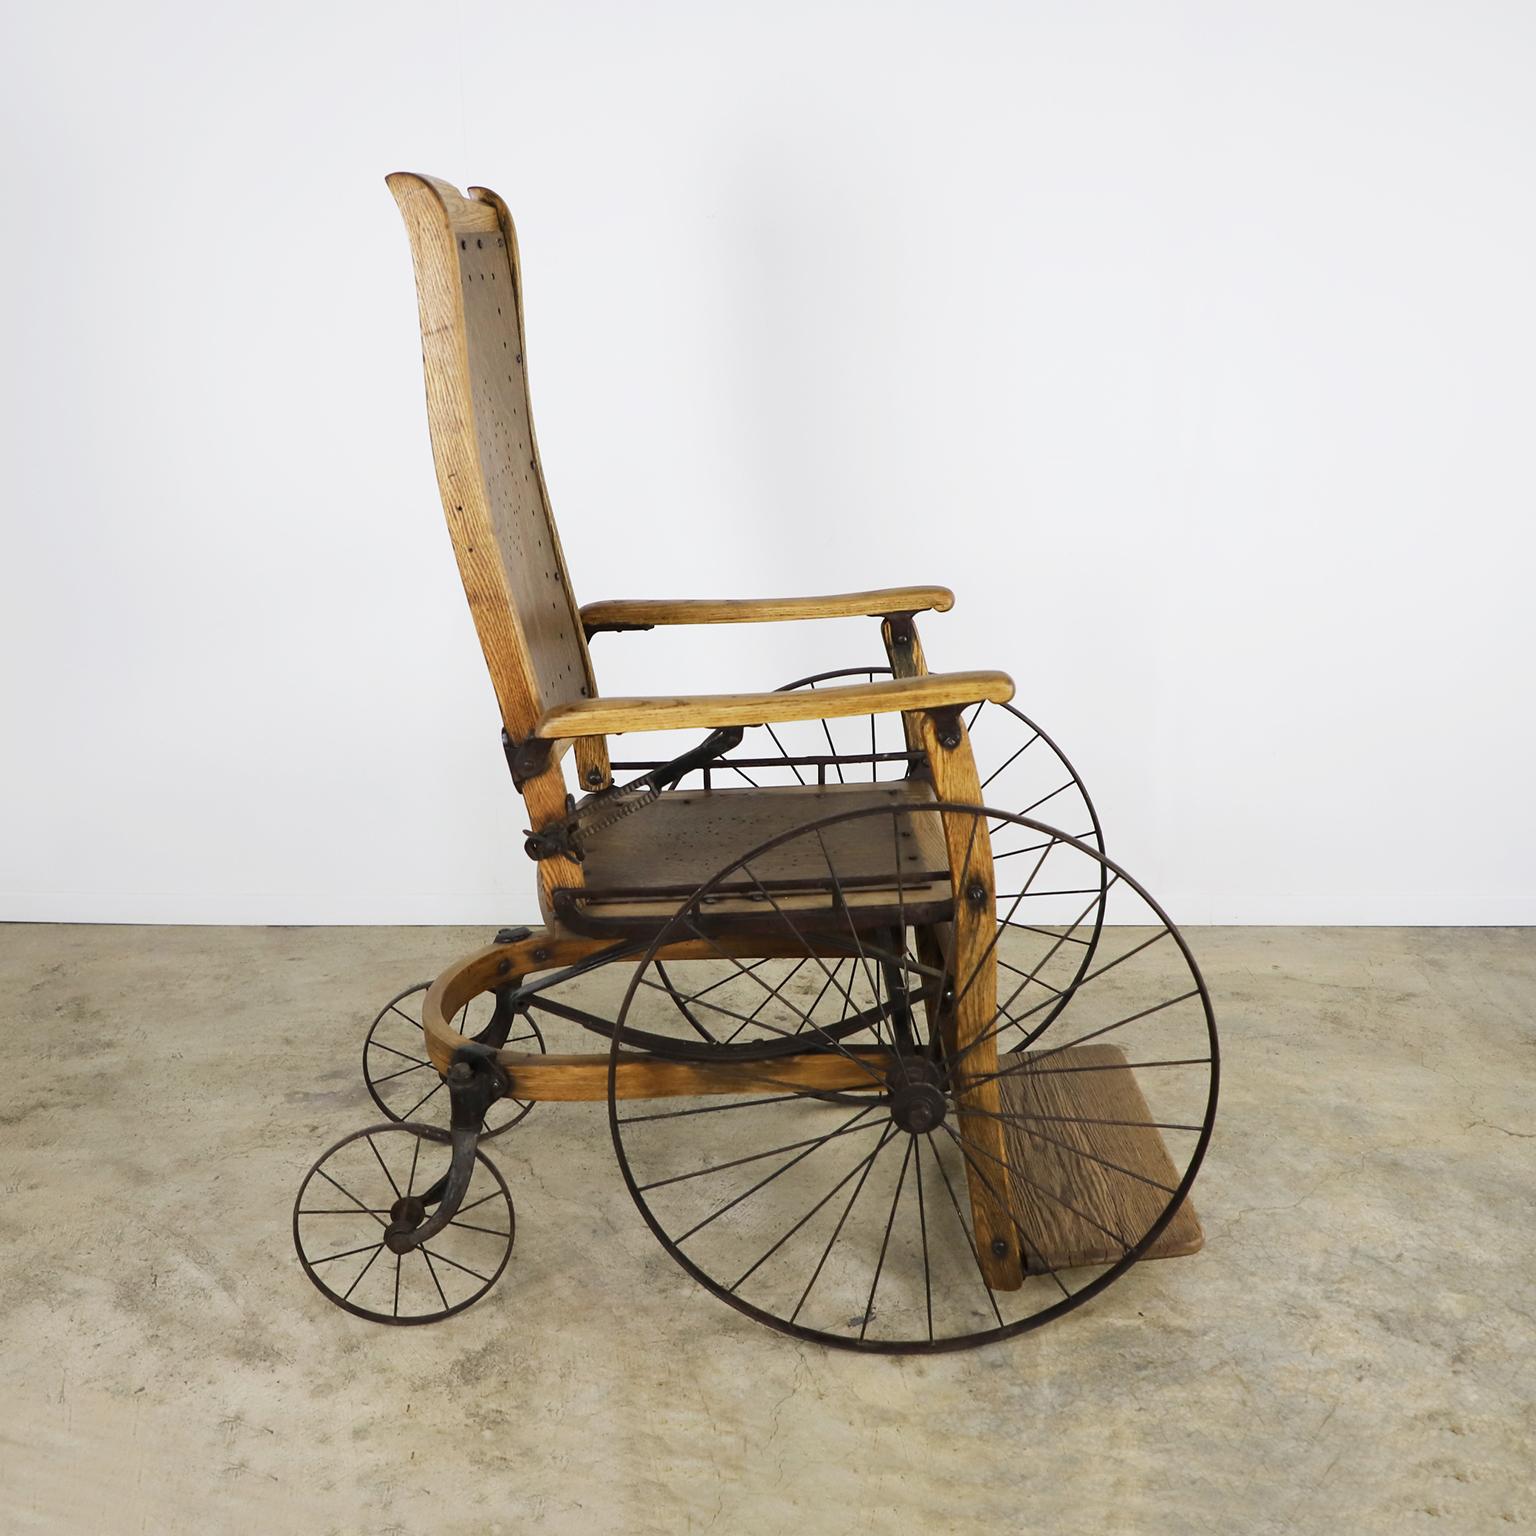 Circa 1900. We offer this rare Wooden Wheelchair. Crafted in wood and Iron, the wheelchair showcases impeccable workmanship that speaks to the heart of American industrial heritage.